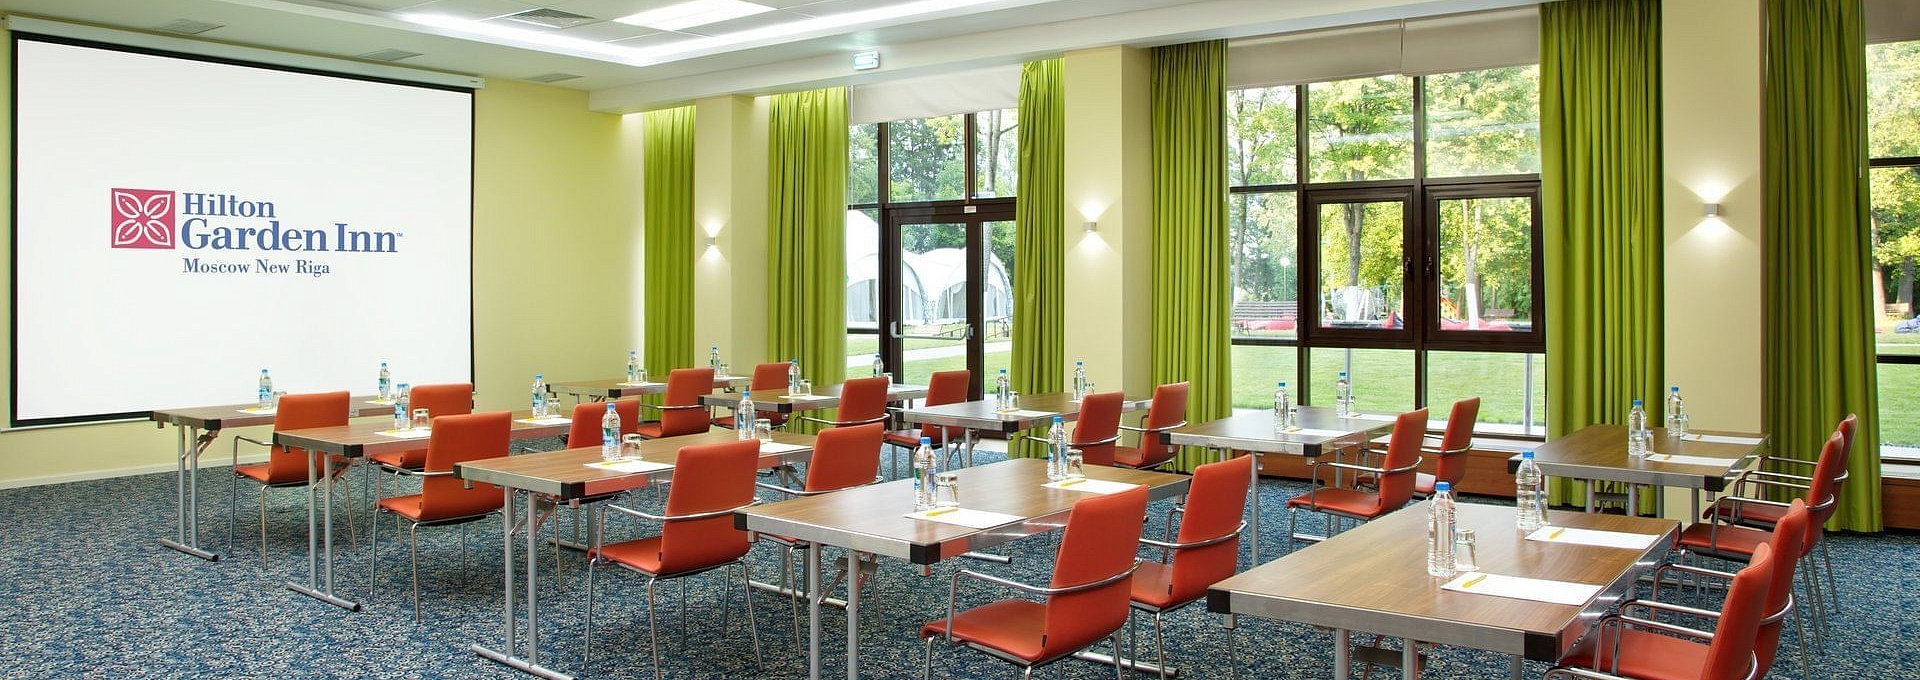 Conference Room at Hilton Garden Inn Moscow New Riga Hotel